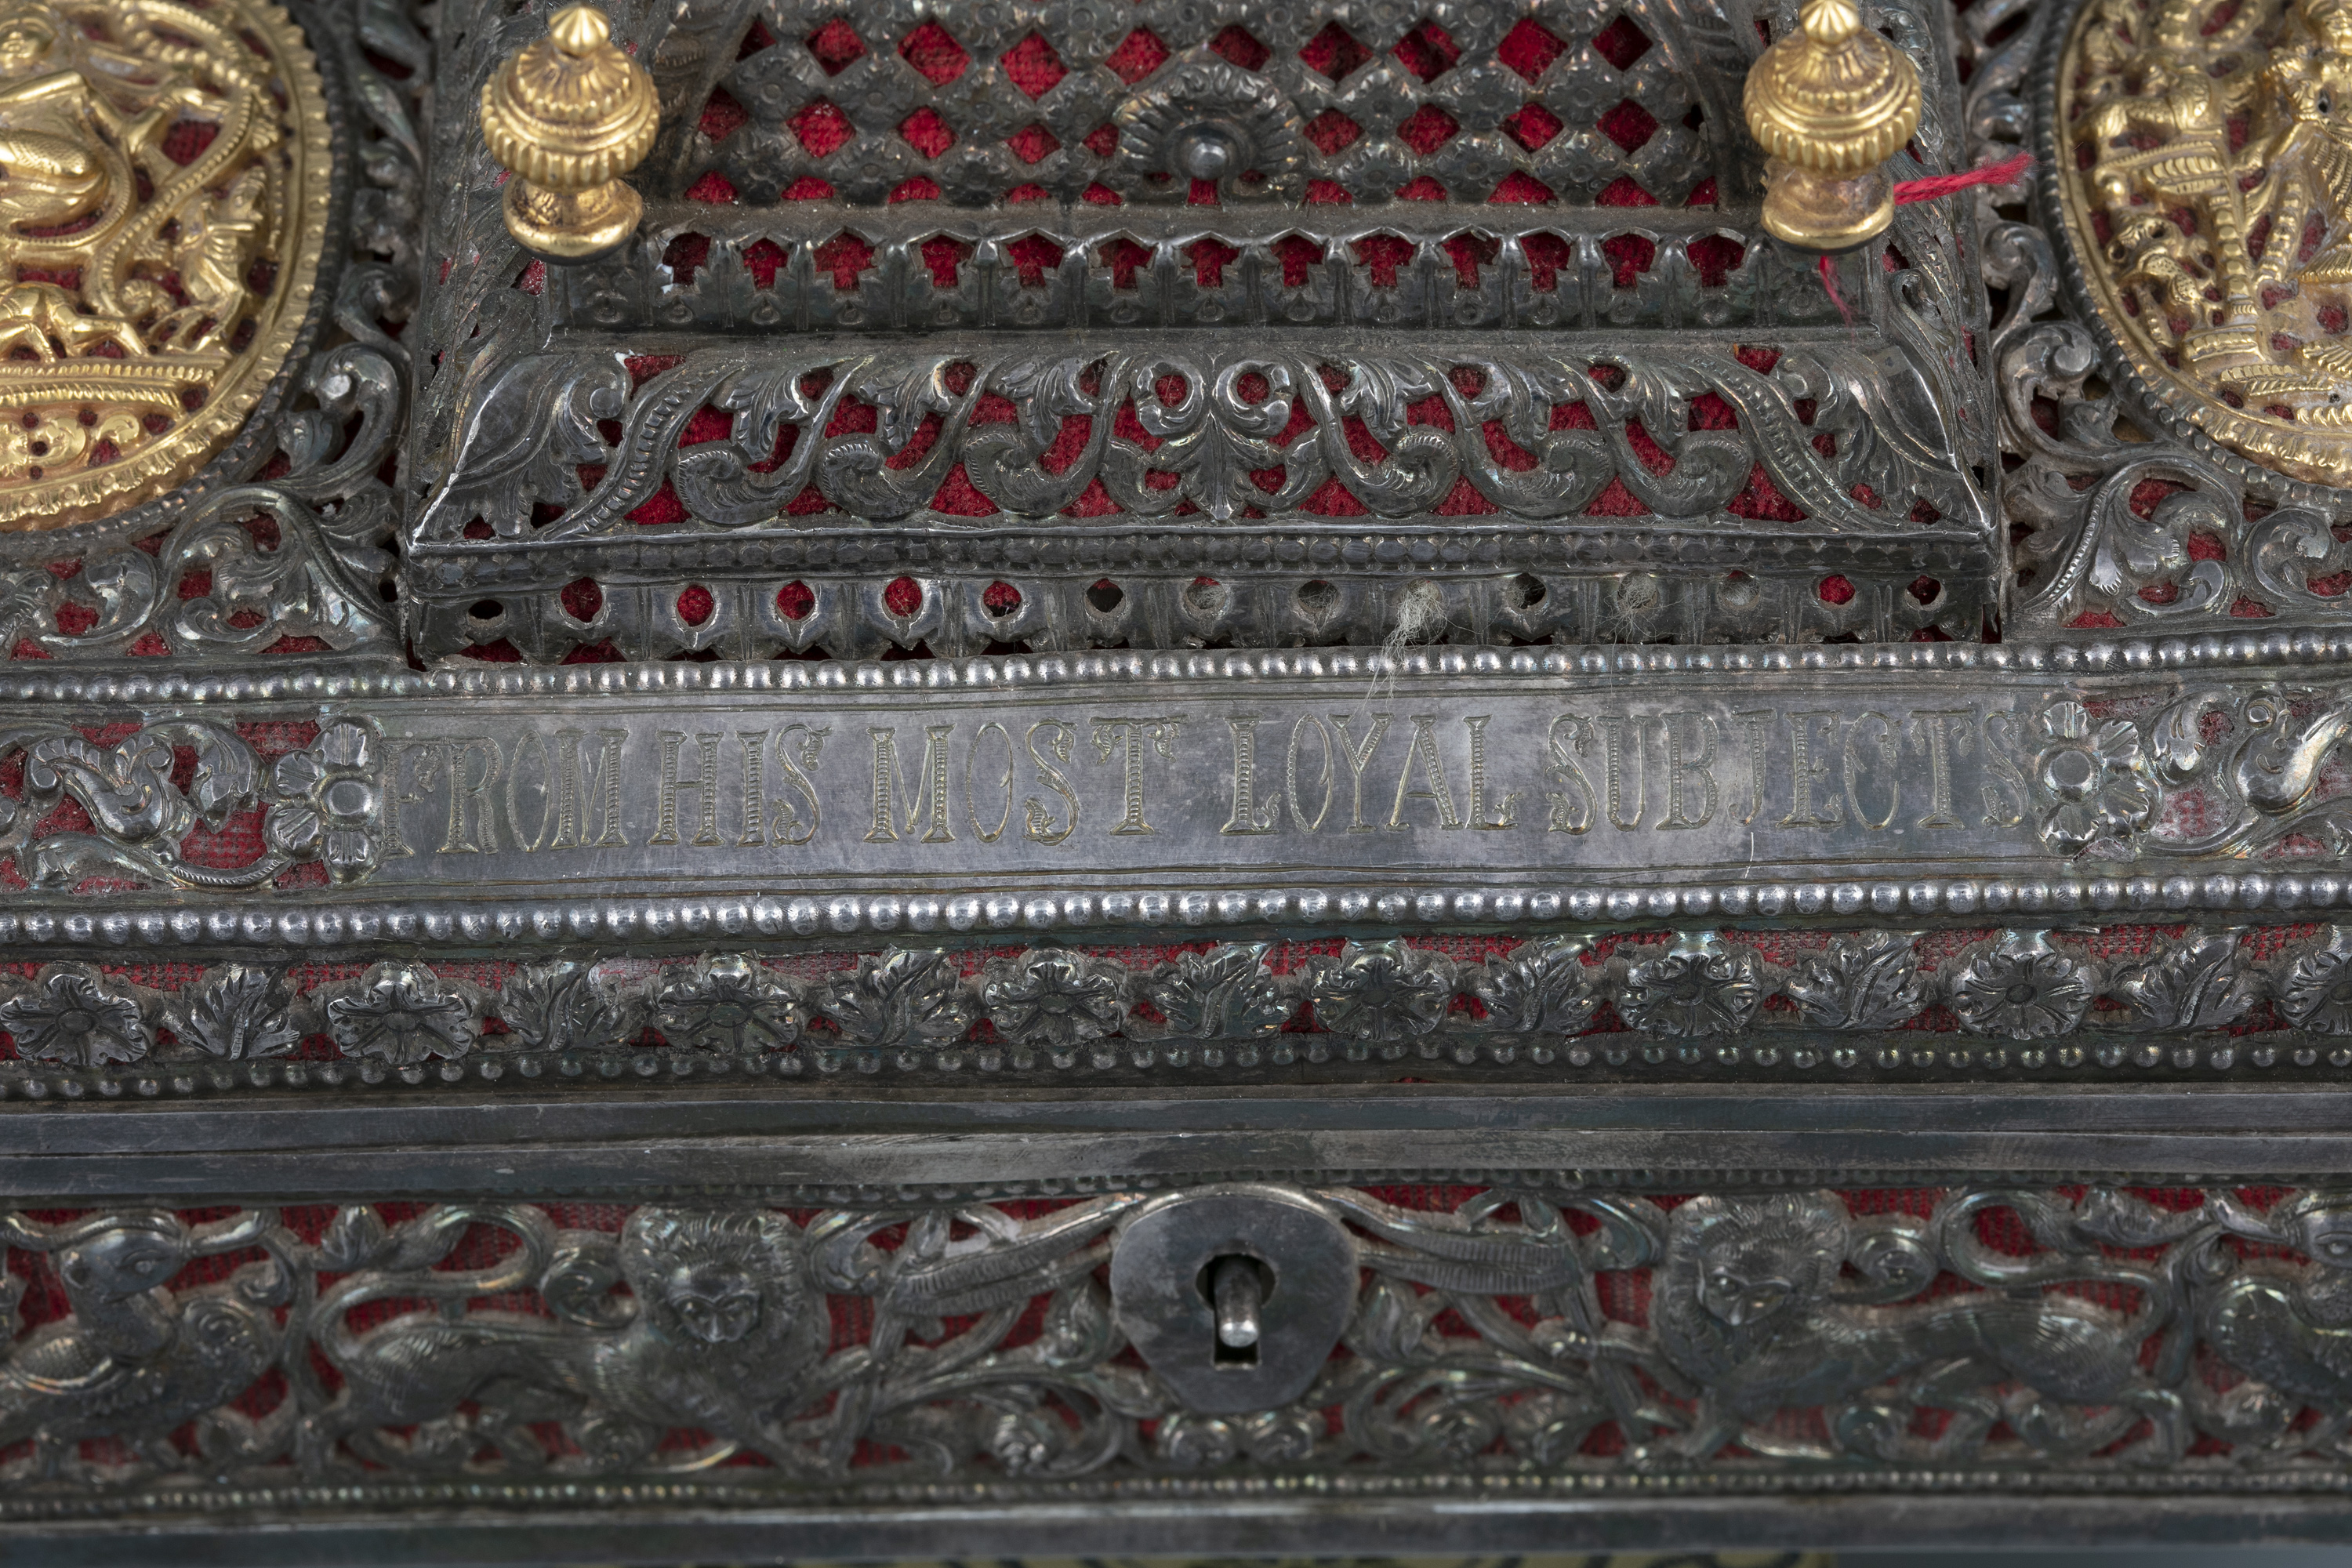 A UNIQUE AND IMPORTANT GOLD, SILVER AND FABRIC EMBELLISHED TEMPLE-SHAPED CEREMONIAL BOX GIFTED TO - Image 2 of 6